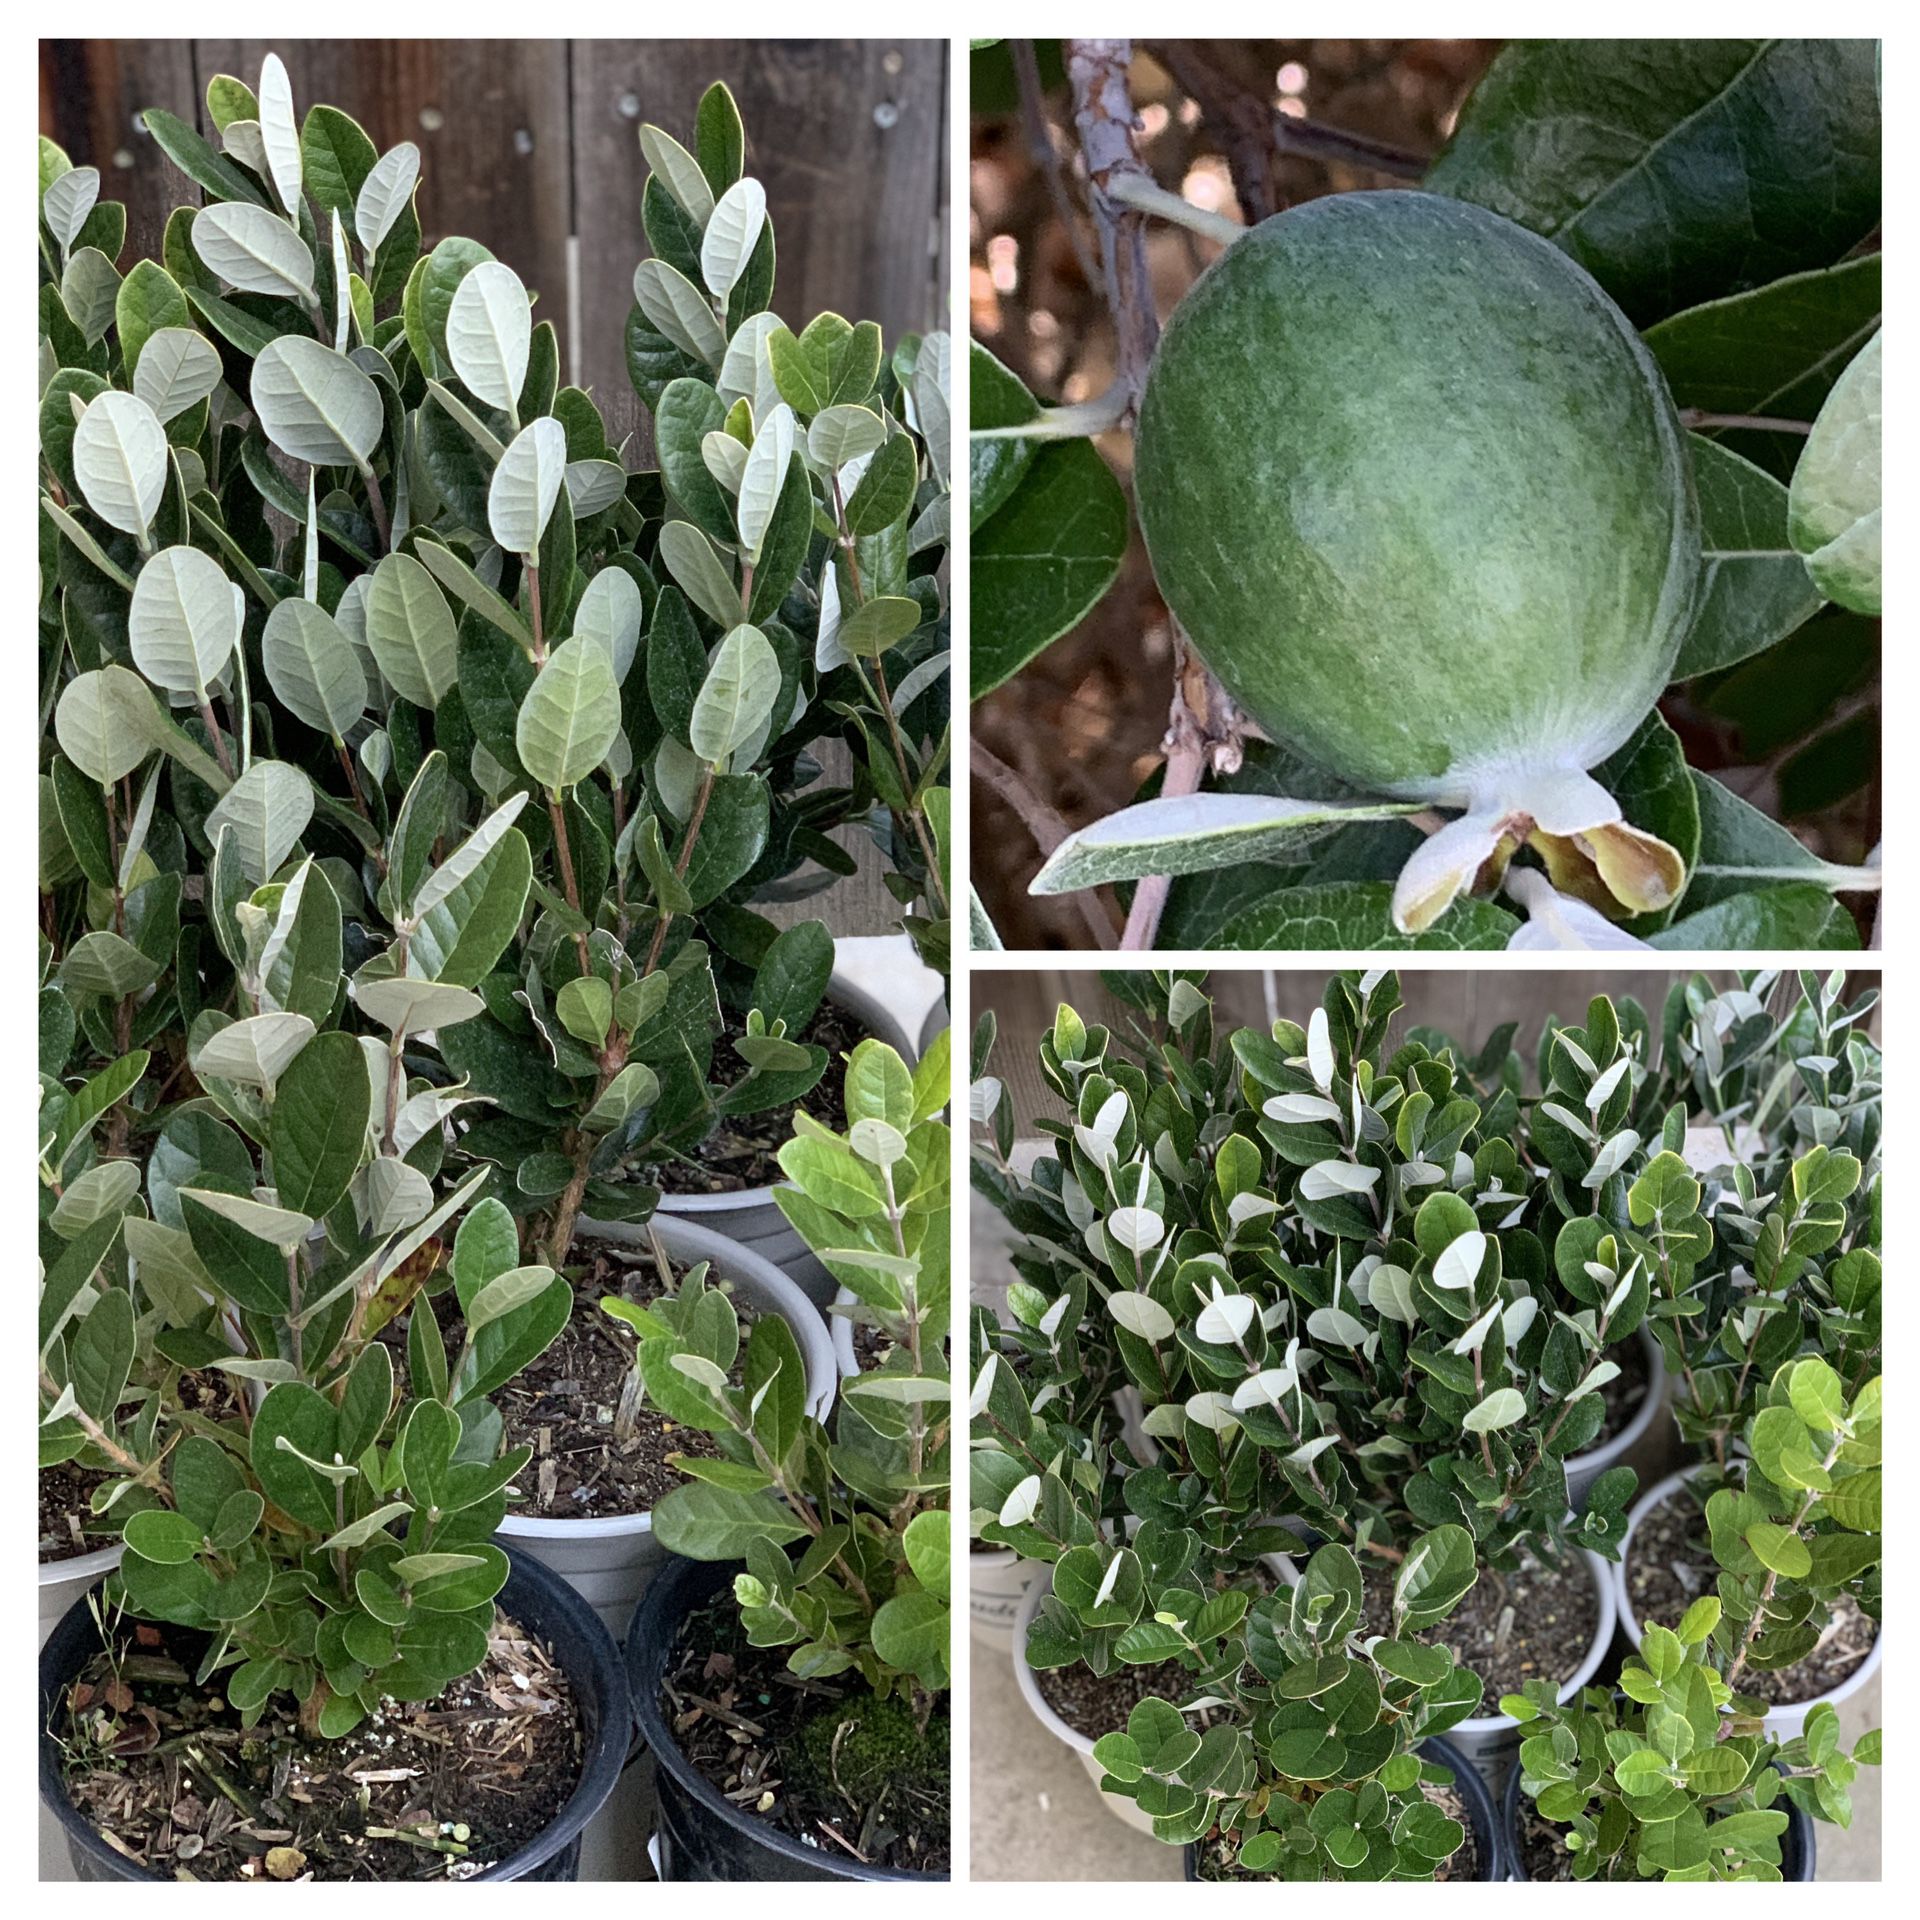 $25 Each Feijoa Sellowiana Pineapple Guava Live Fruit Tree Plant Bush Shrub One Gallon Pot approximately 1 to 2 ft tall  $25 Each  CASH ONLY  